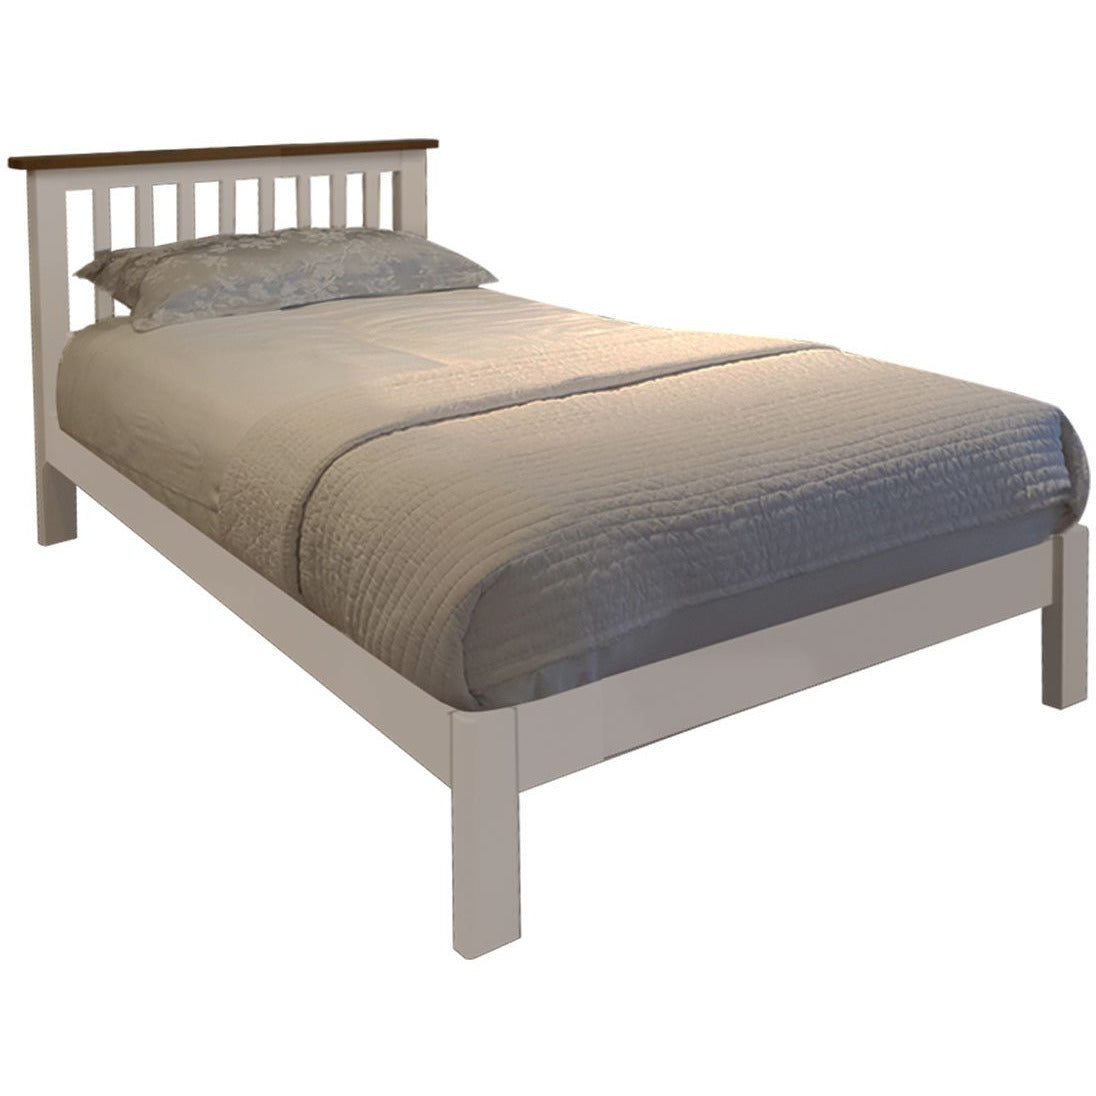 two tone boys bed frame, childs bedframe for sale